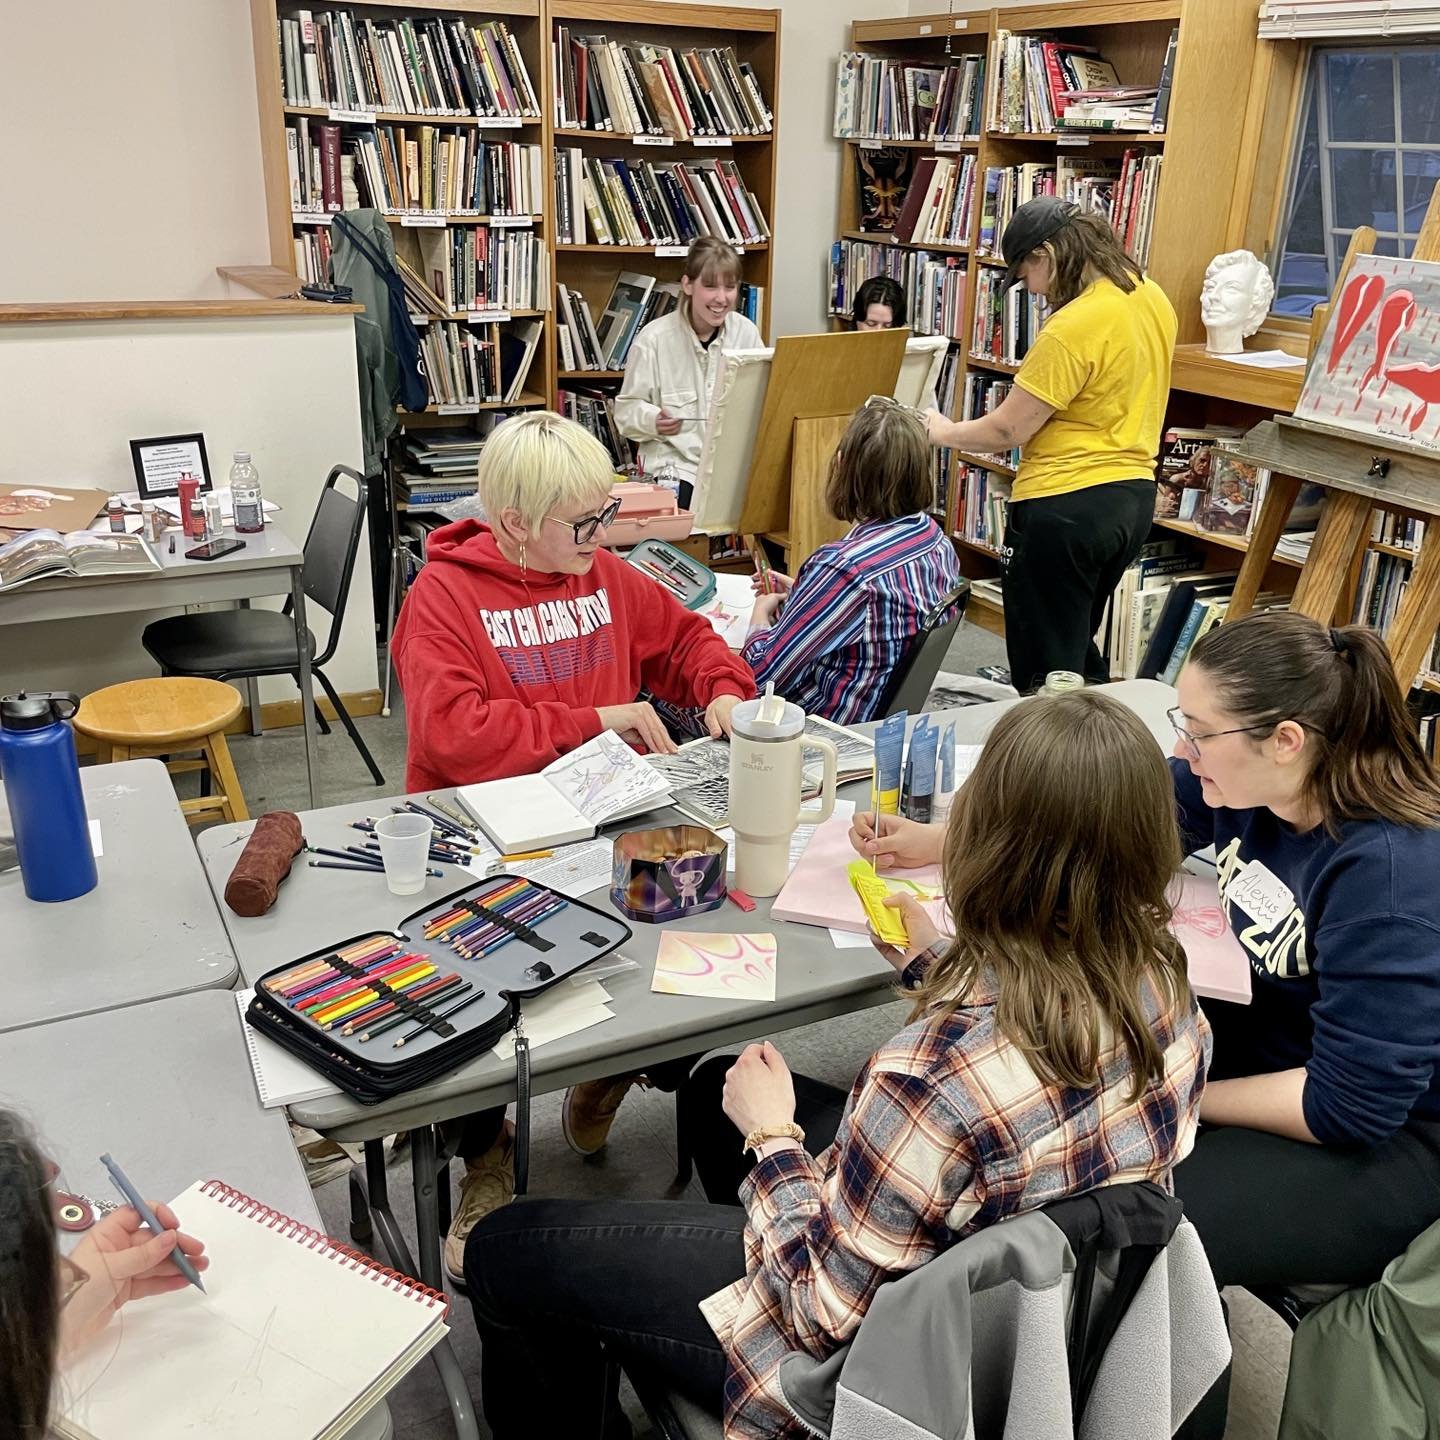 Another successful evening with CAC&rsquo;s Emerging Artists Society (EAS)! This meeting was focused around informal critique and art making. Members brought works-in-progress to gain valuable feedback through critique, as well as participated in ded